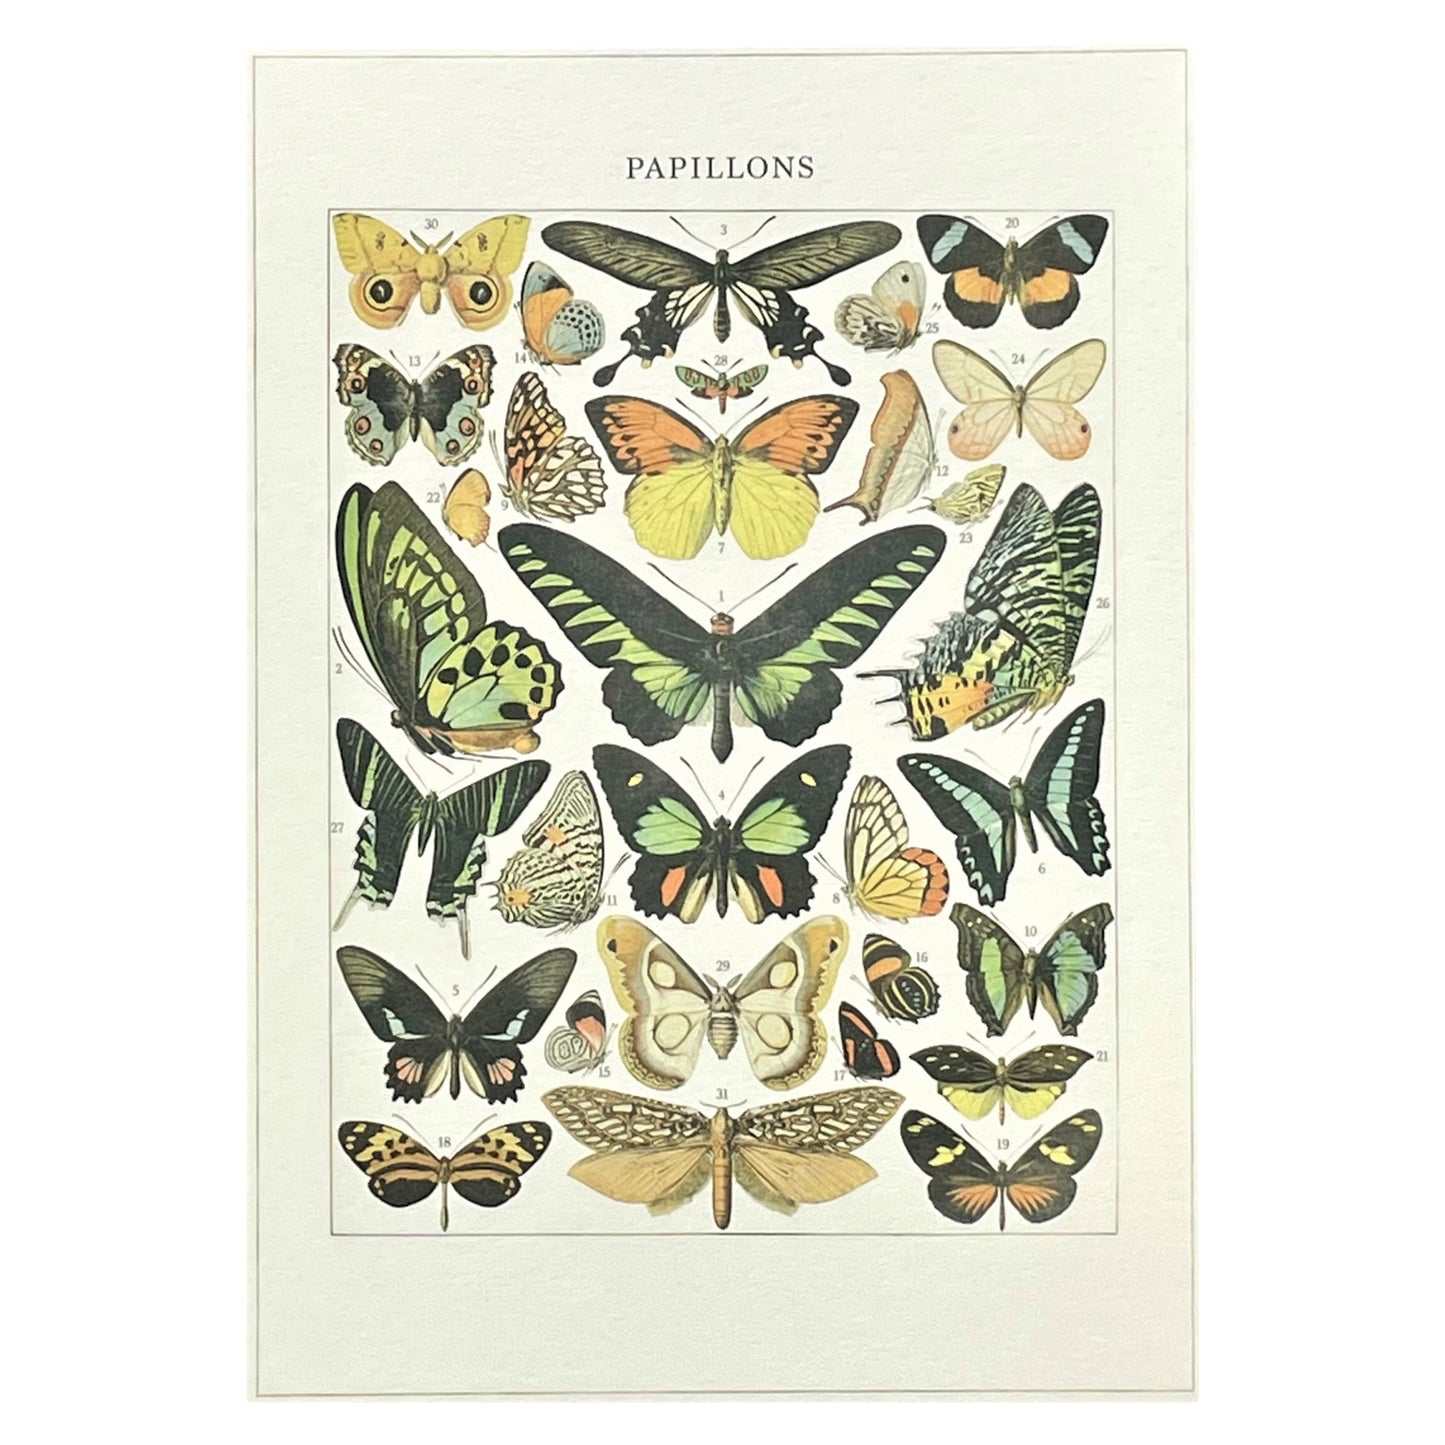 greetings card with drawing of many species of colourful butterflies by the Pattern Book